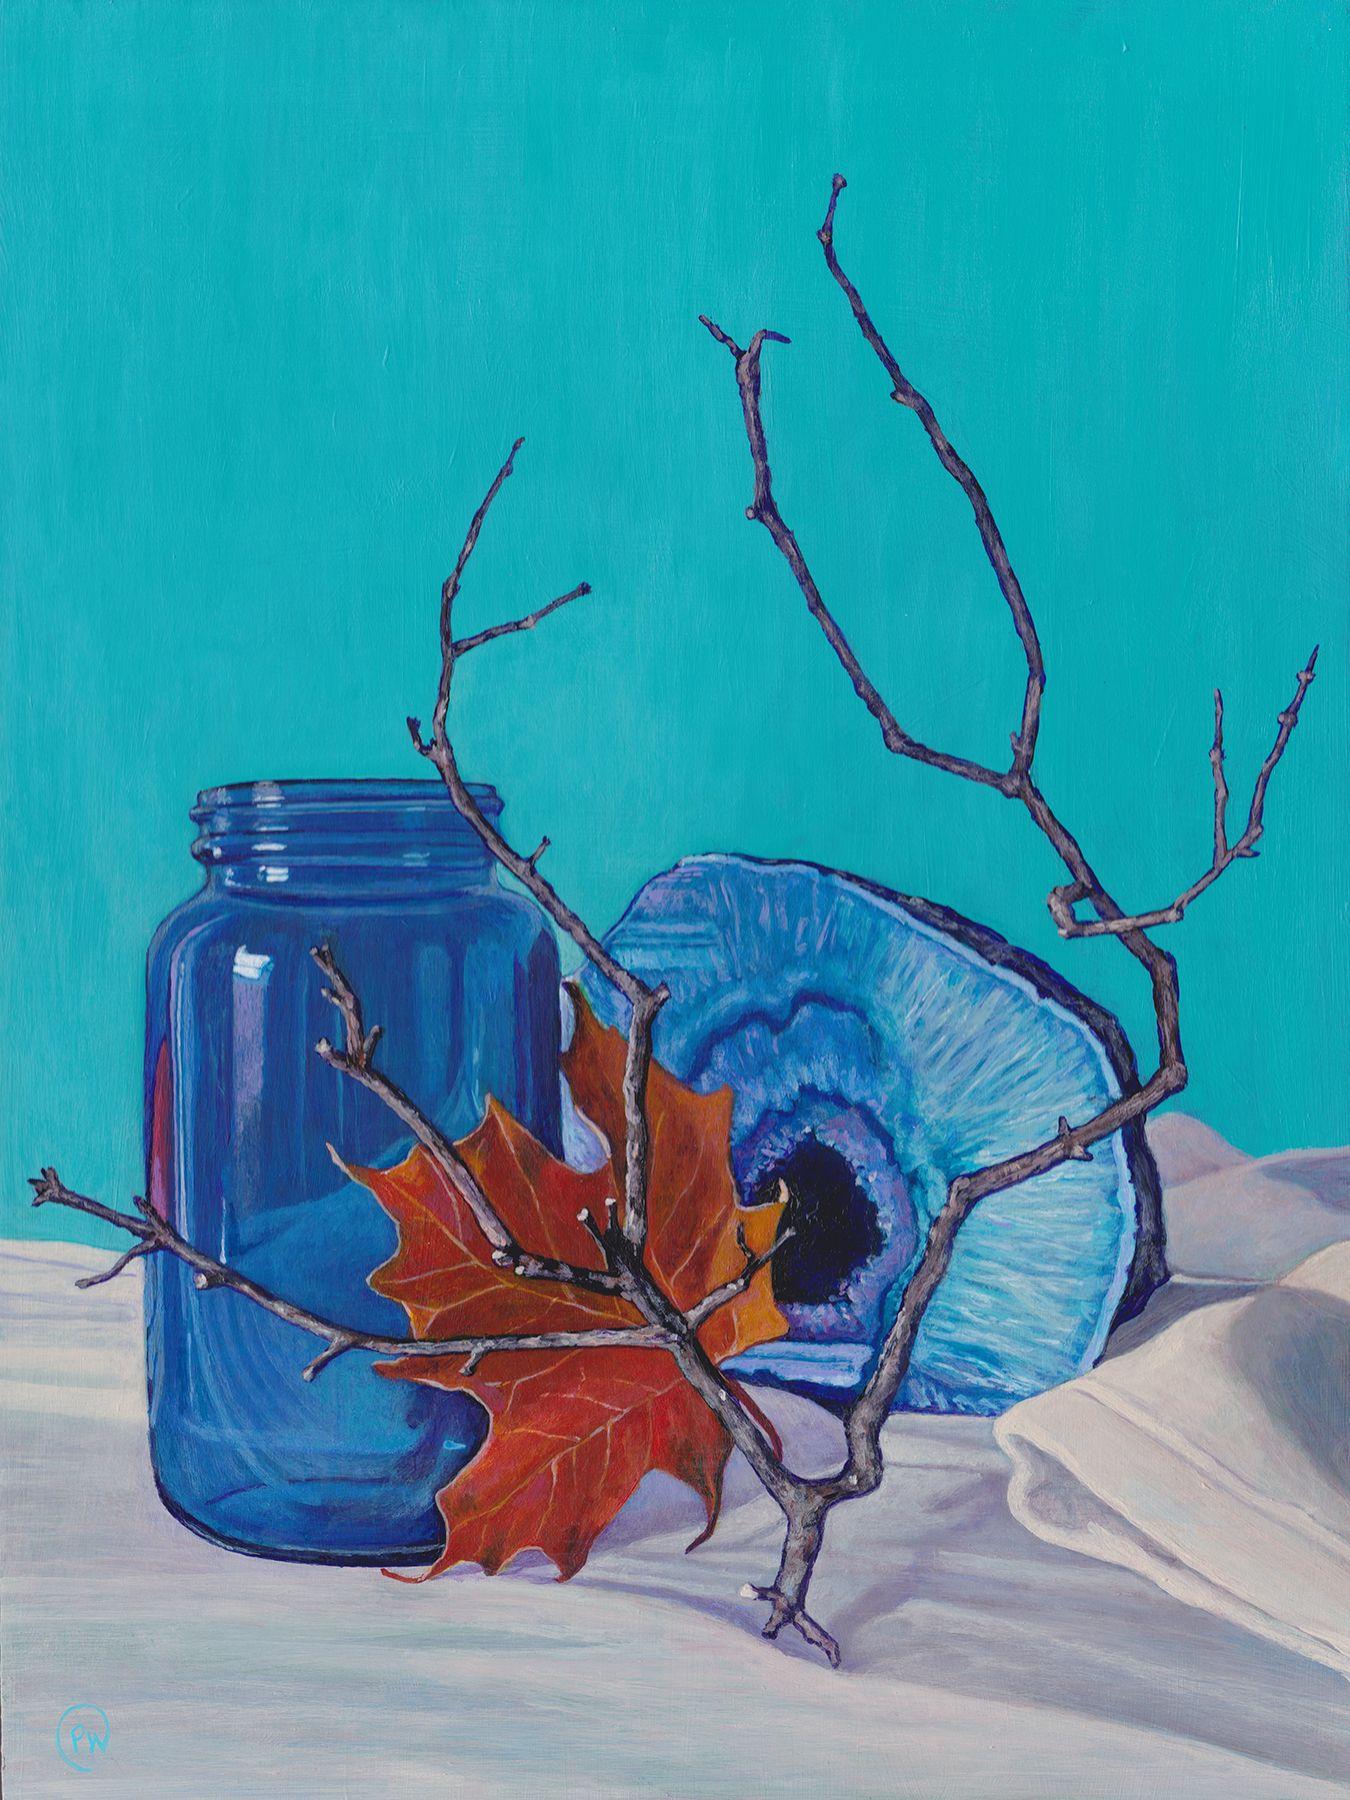 Paige Wallis Still-Life Painting - Wintry Mix, Painting, Acrylic on MDF Panel